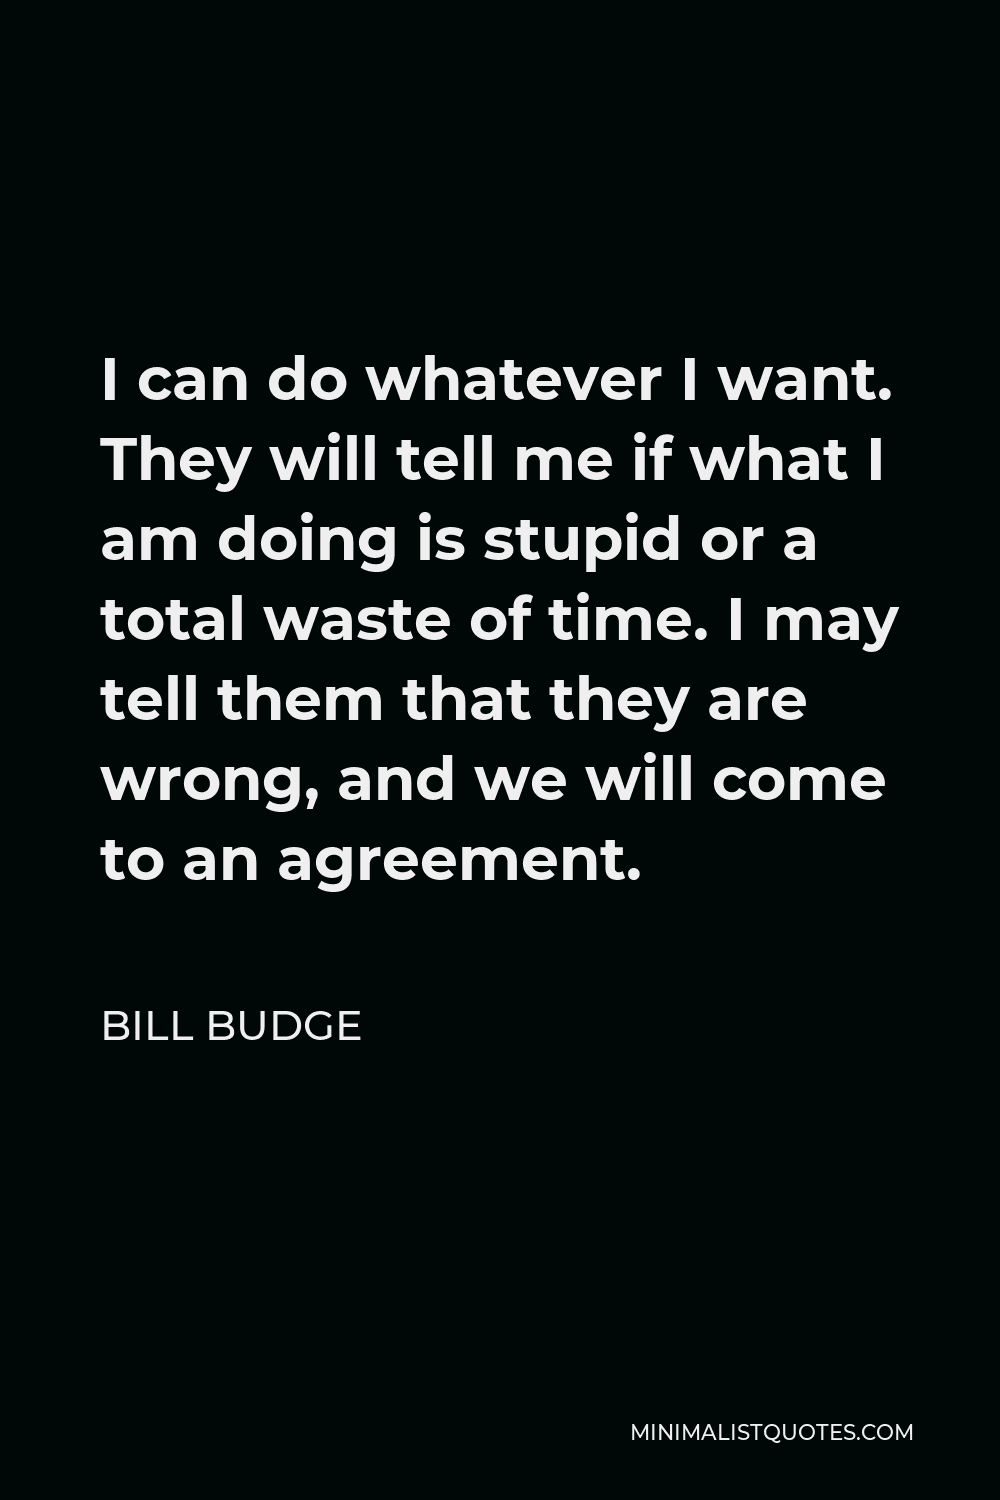 Bill Budge Quote - I can do whatever I want. They will tell me if what I am doing is stupid or a total waste of time. I may tell them that they are wrong, and we will come to an agreement.